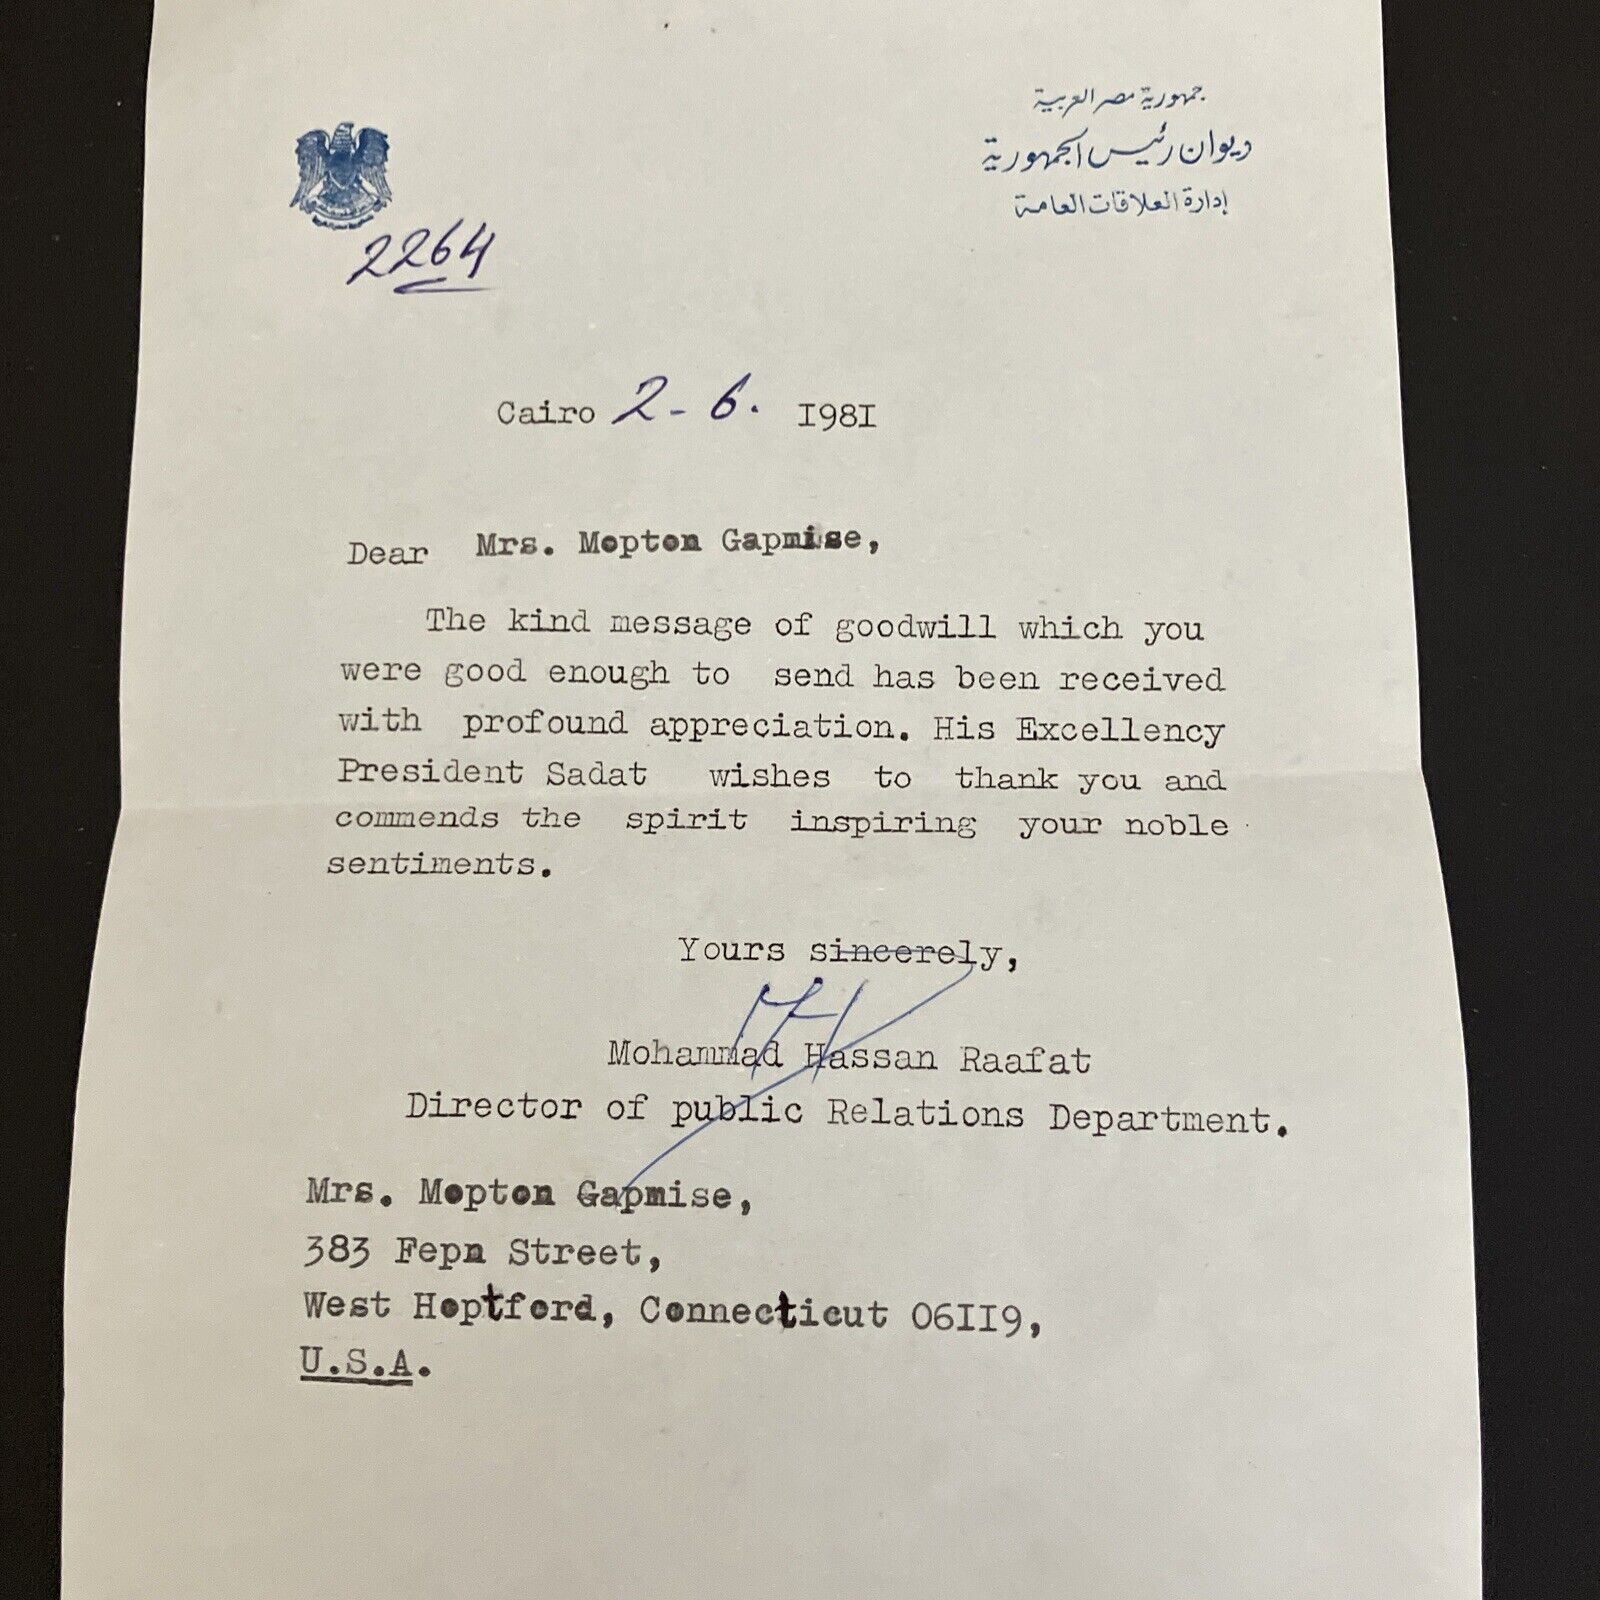 Anwar Sadat Personal Letter Signed By Director of Pub. Relations Dept Cairo 2/81